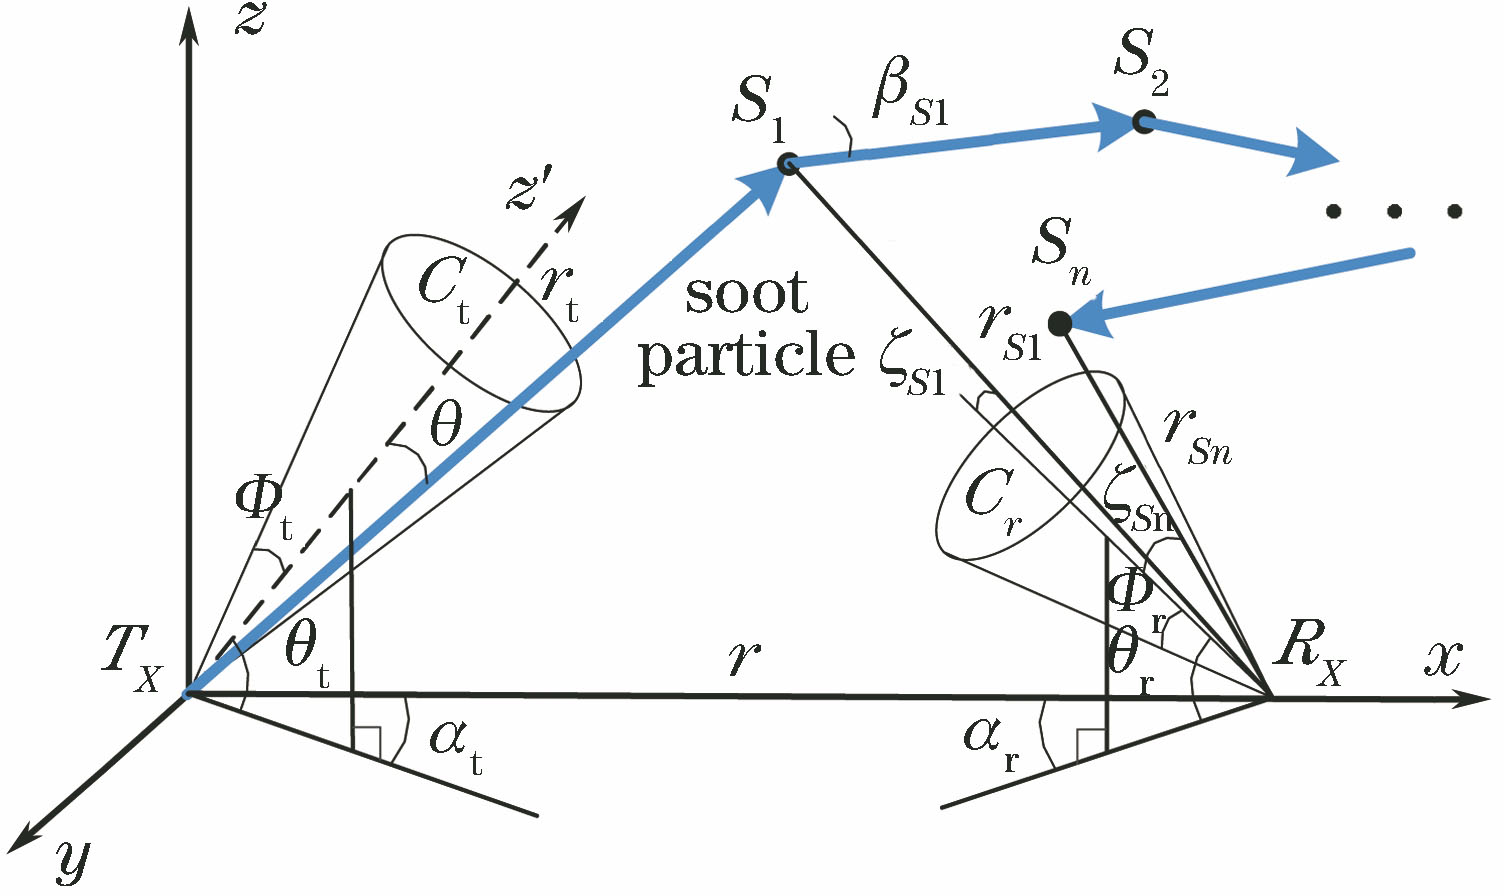 Model for multiple scattering channel of soot